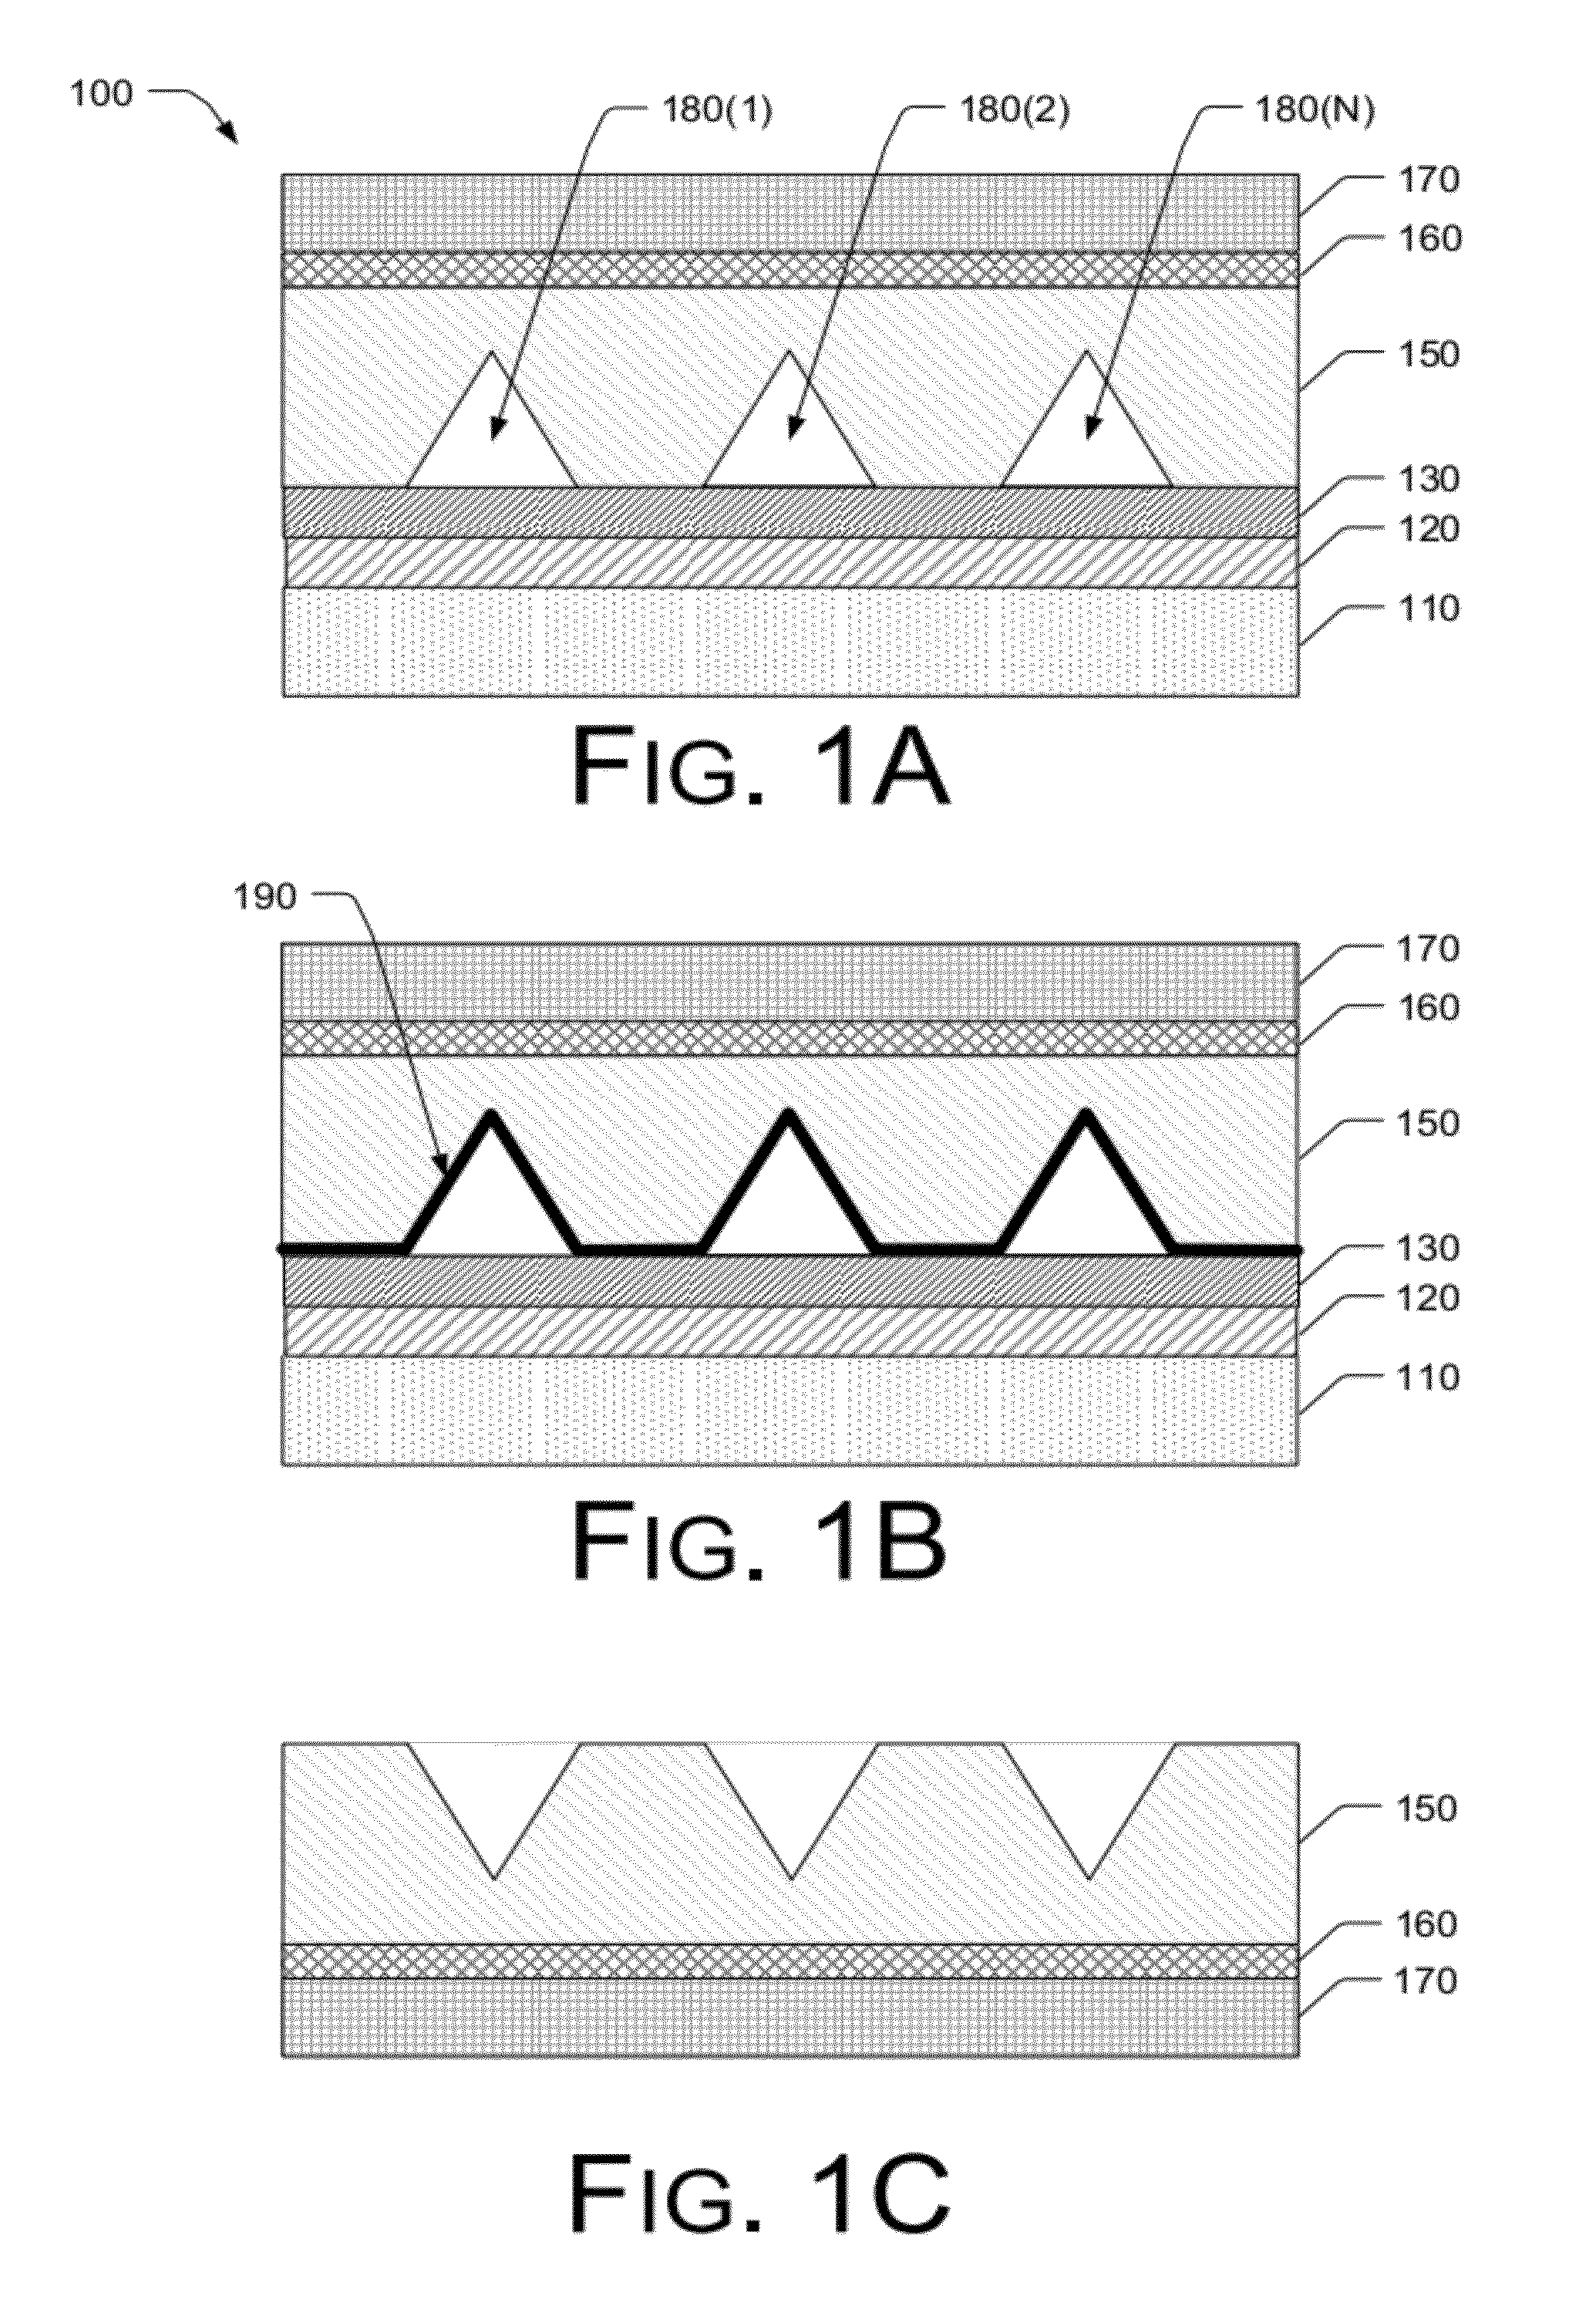 Method of Separating Nitride Films from the Growth Substrates by Selective Photo-Enhanced Wet Oxidation